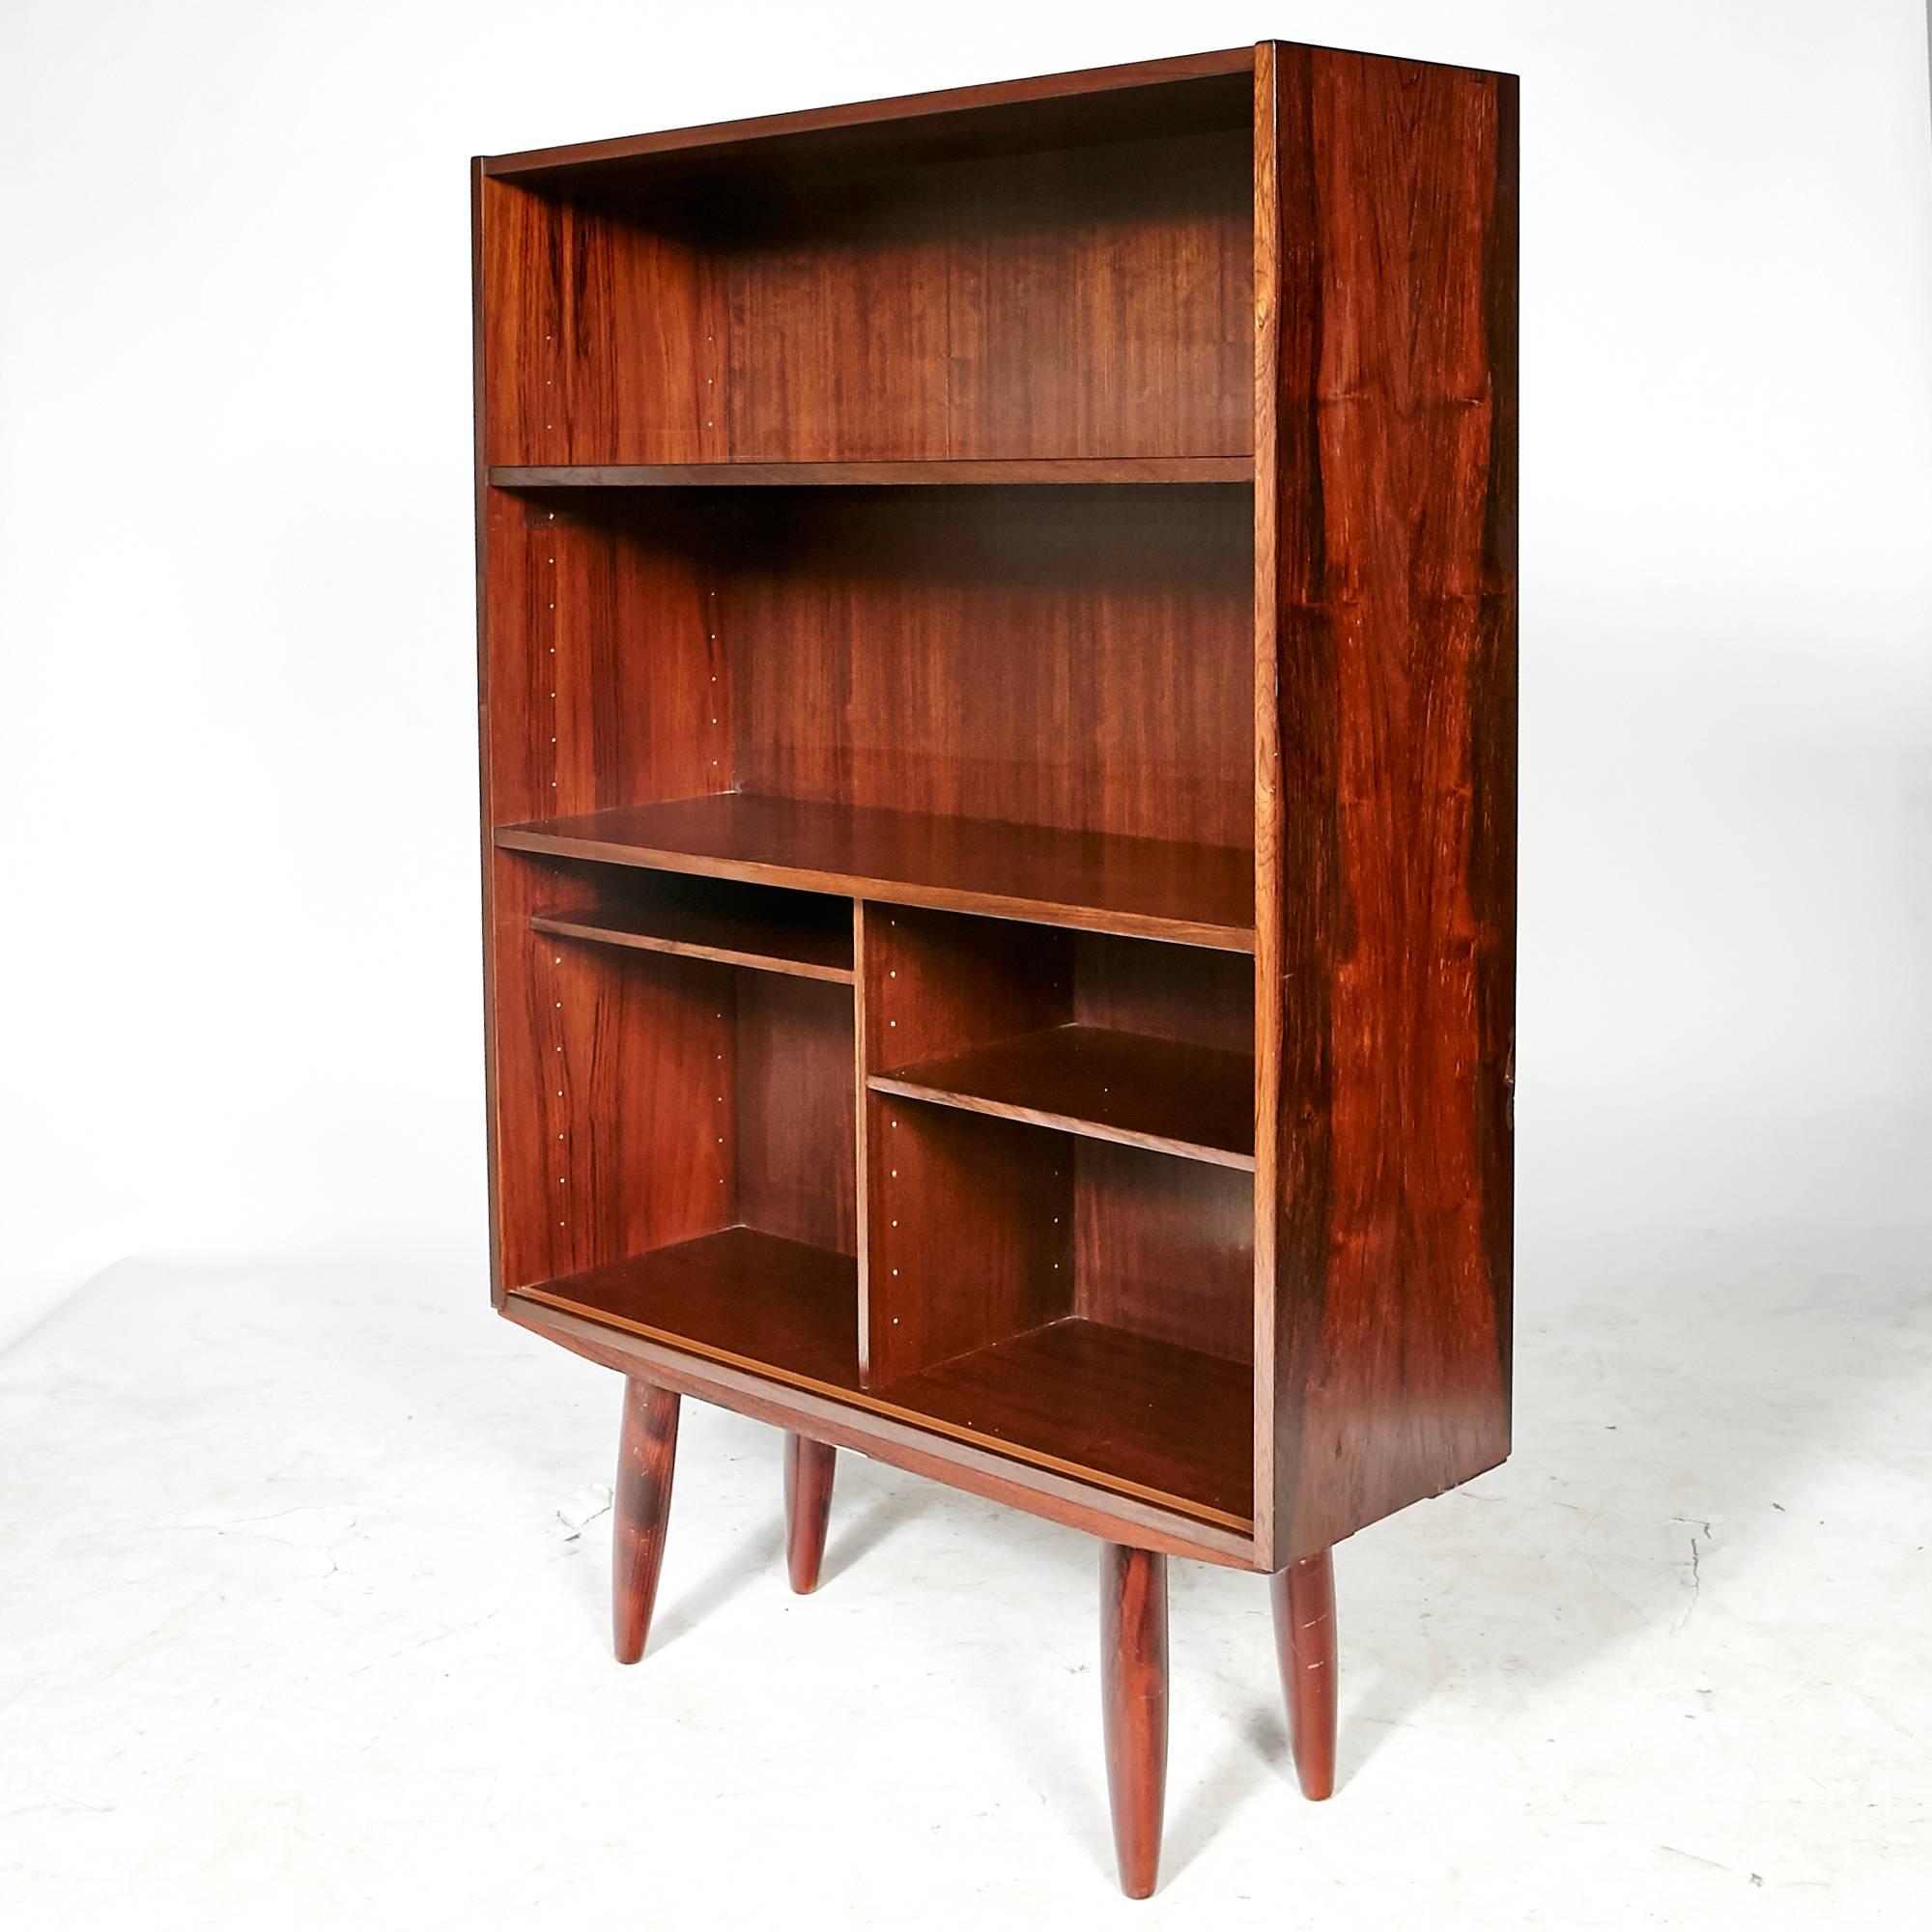 Vintage Scandinavian Modern Danish rosewood small bookcase with adjustable shelving and round angled rosewood legs. Unmarked.